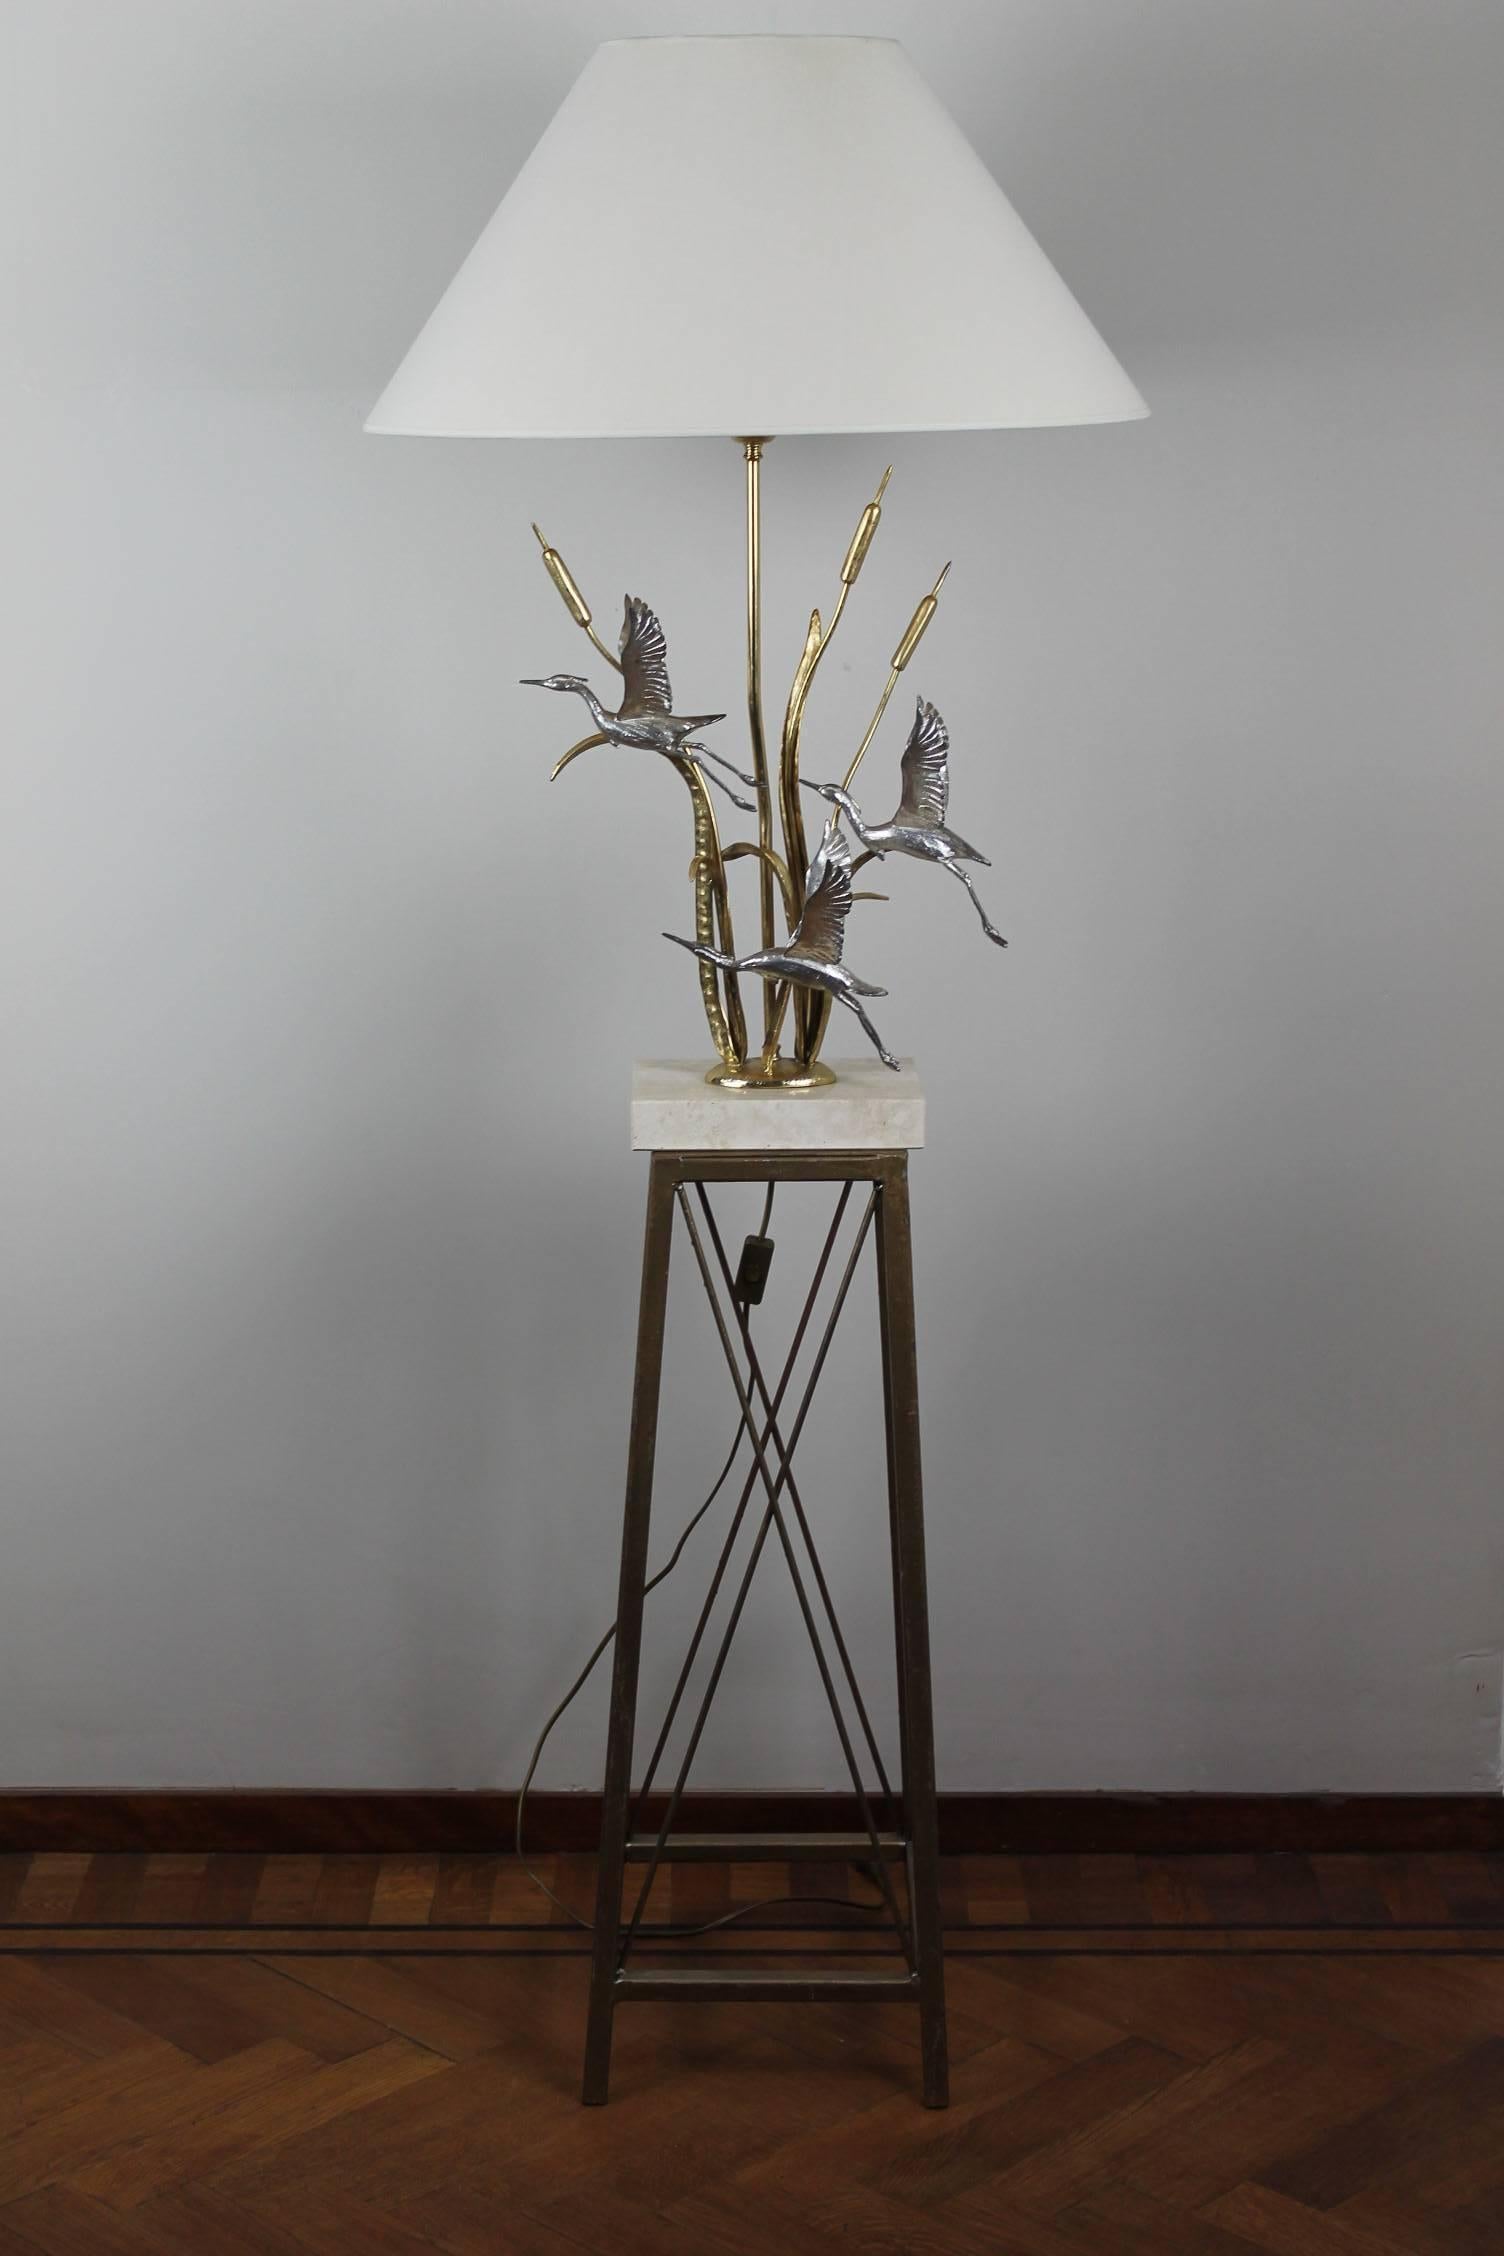 Exceptional 1970s design table lamp by the Italian creator Lanciotto Galeotti
for L' Originale Italy - large model with three birds.
This handmade stylish tablelamp has three herons between the cattails and is a real piece of art. Lighting with